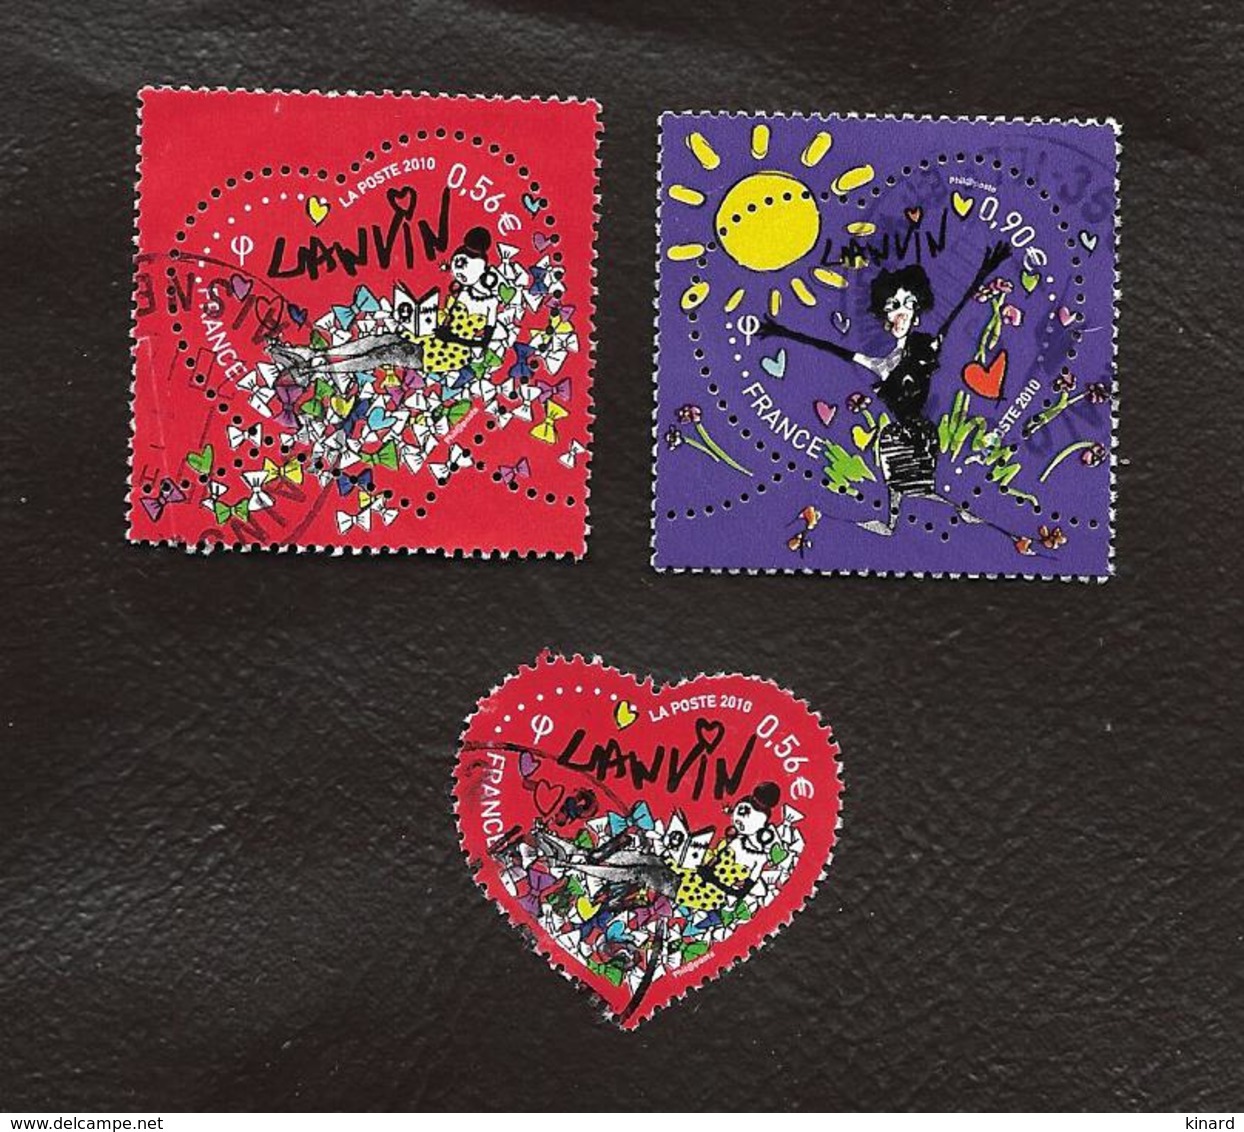 TIMBRES..FRANCAIS...OBLITERATIONS RONDE.S.    COEUR LANVIN ..4431/4432.4432A.  2010.   BE. - Usati